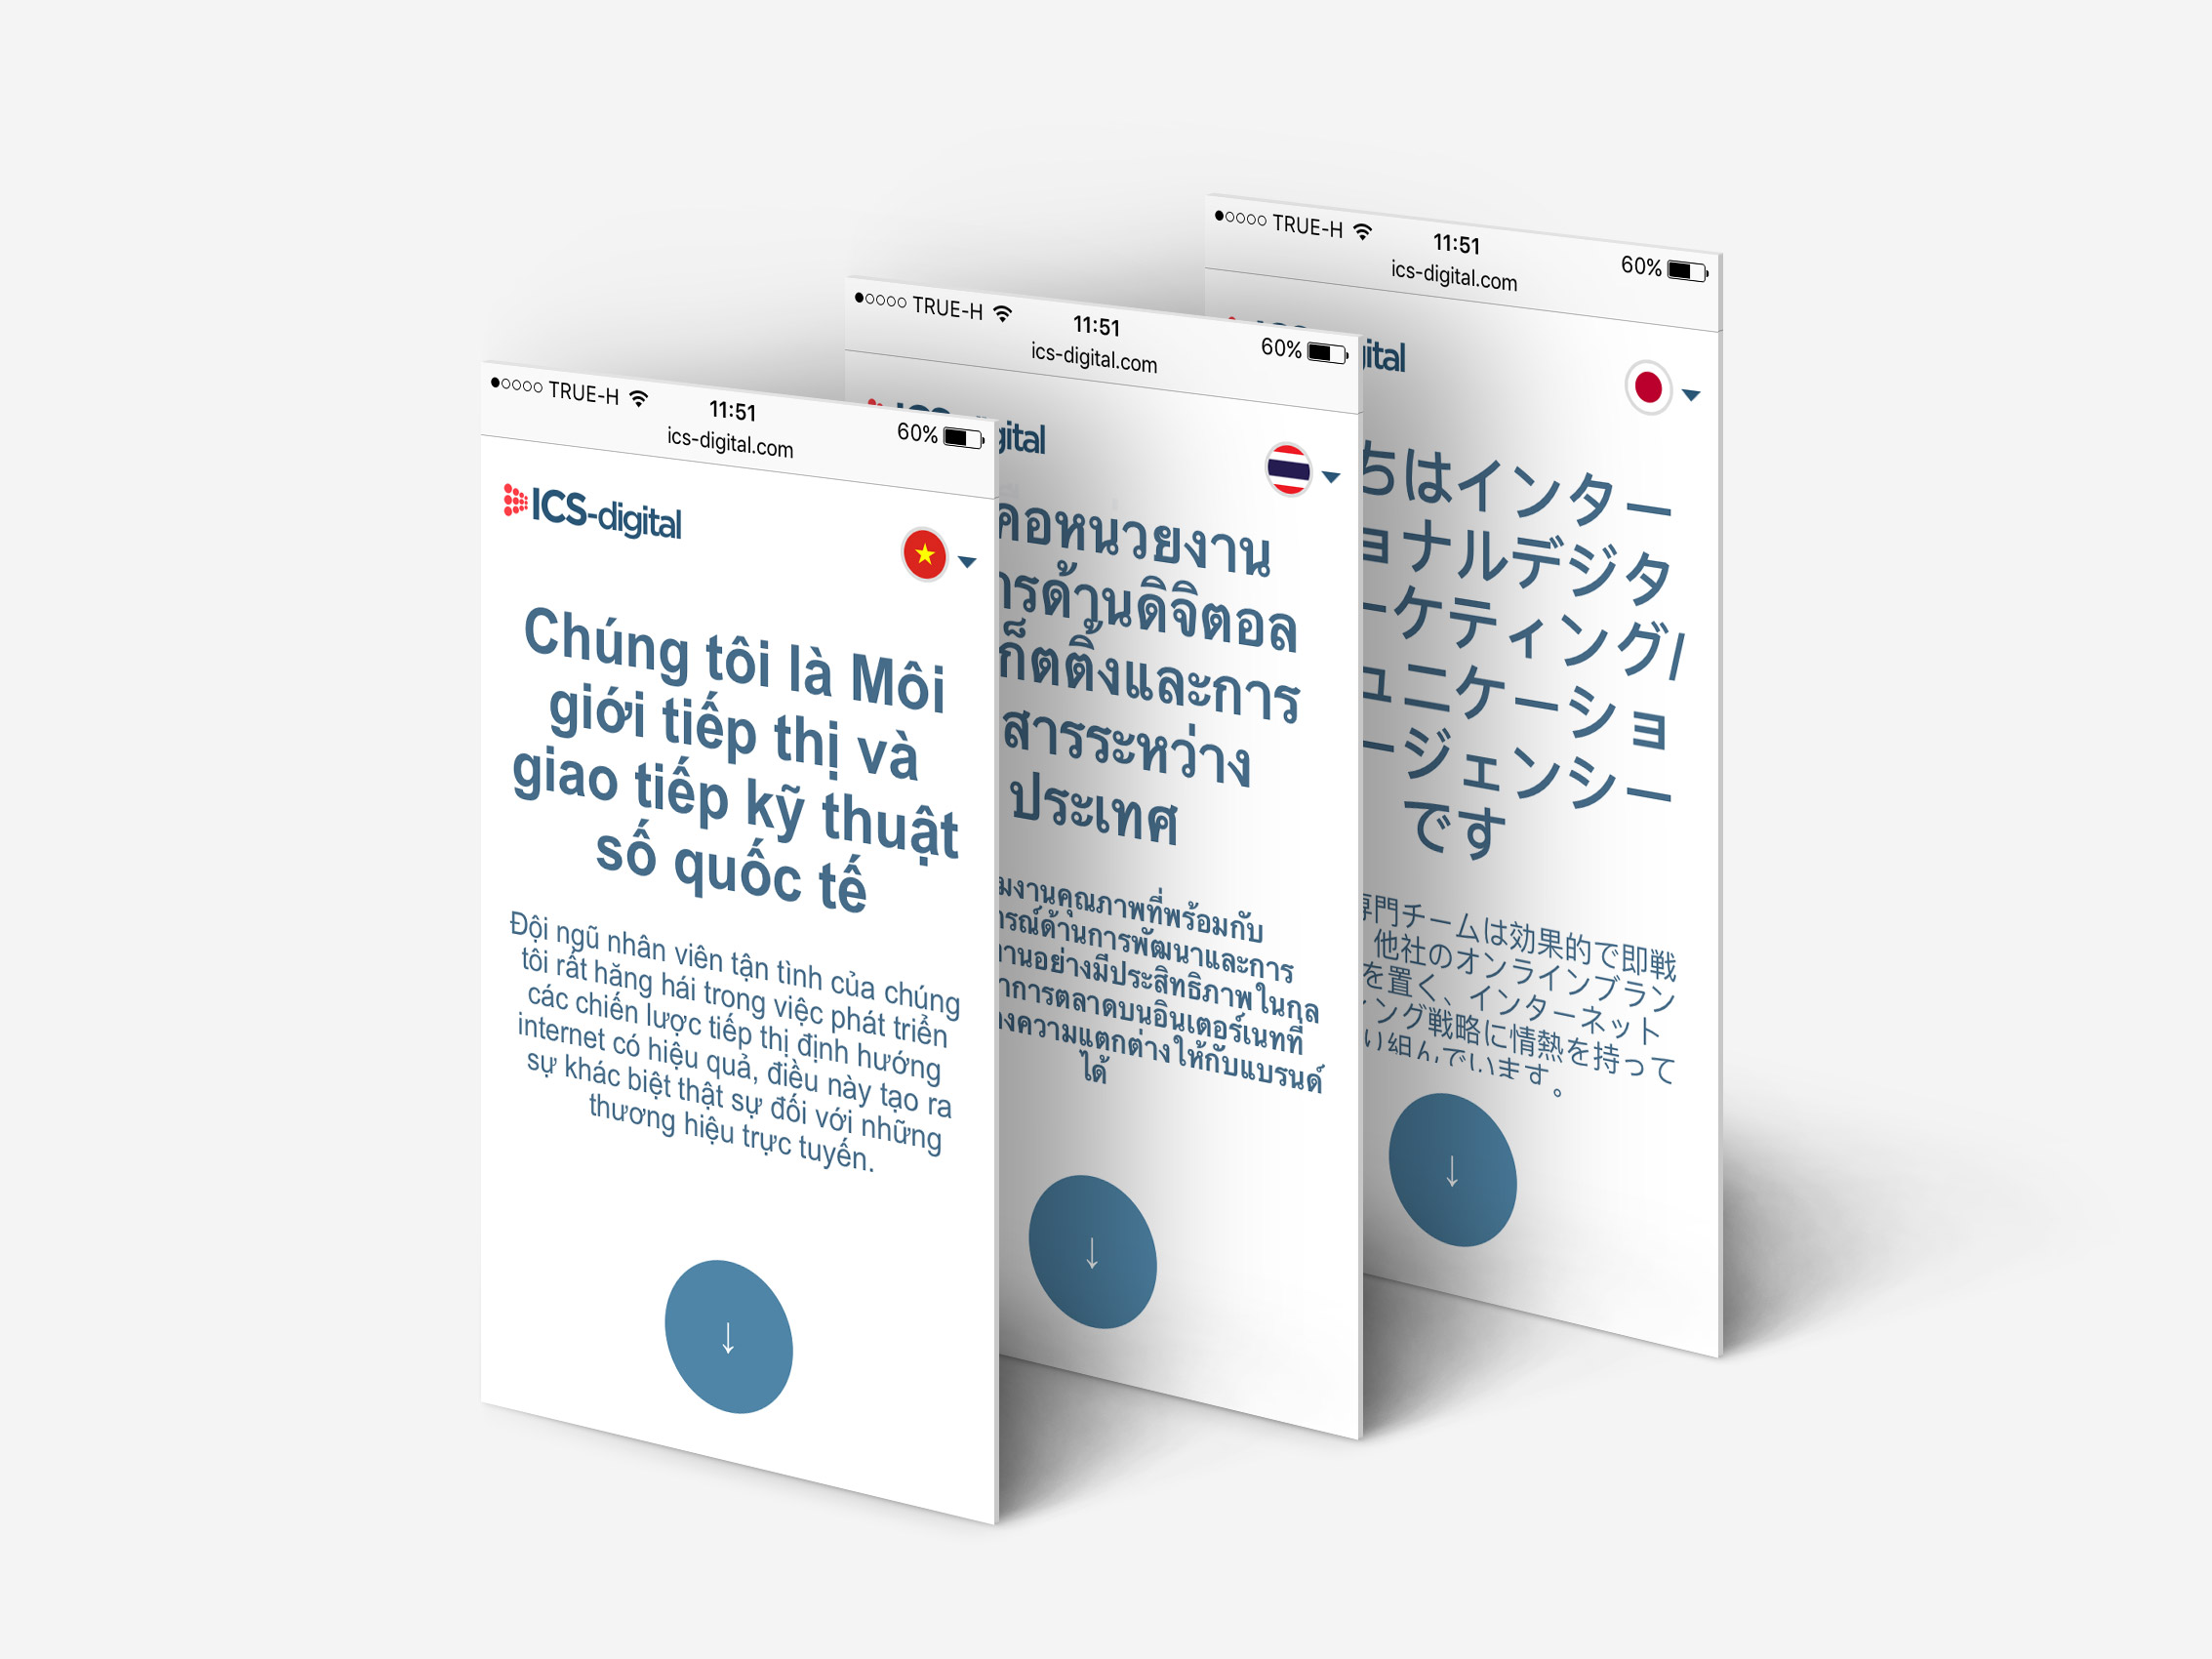 ICS-digital content translated into foreign languages | BOLD